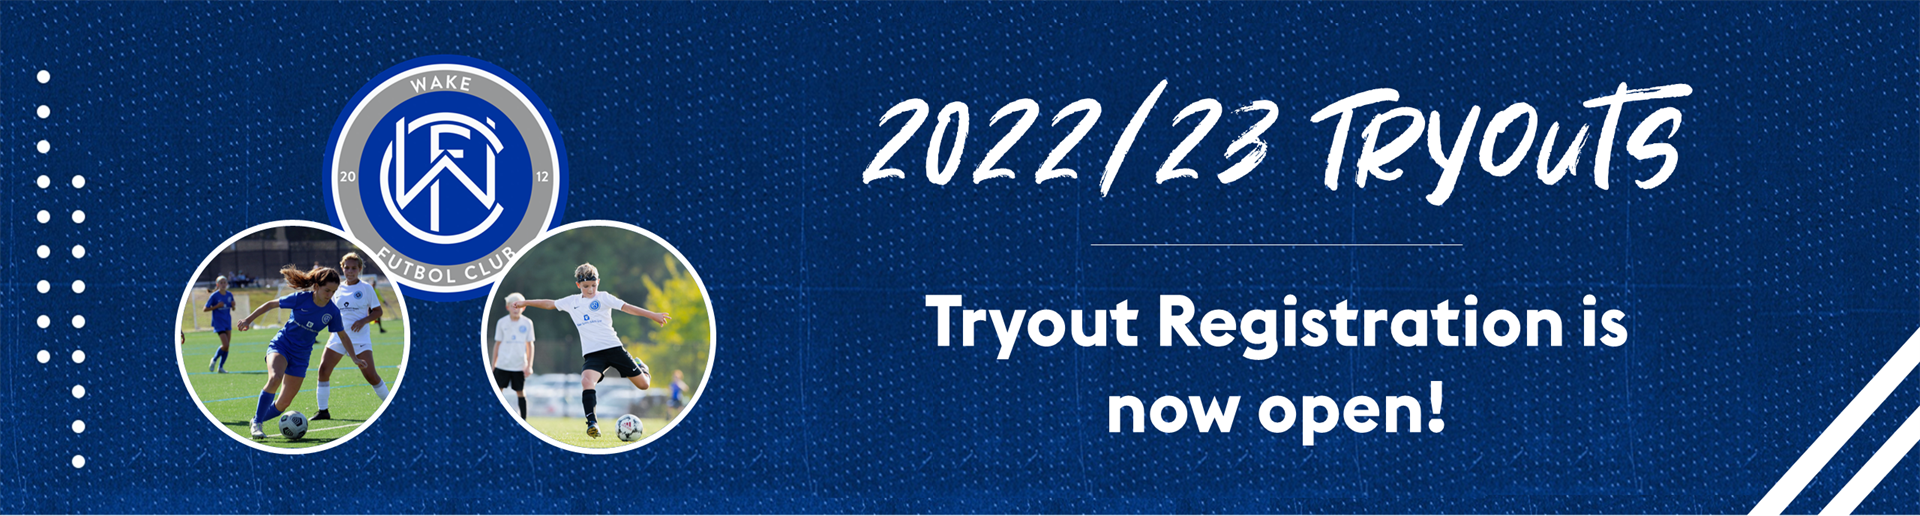 2022/23 Tryouts